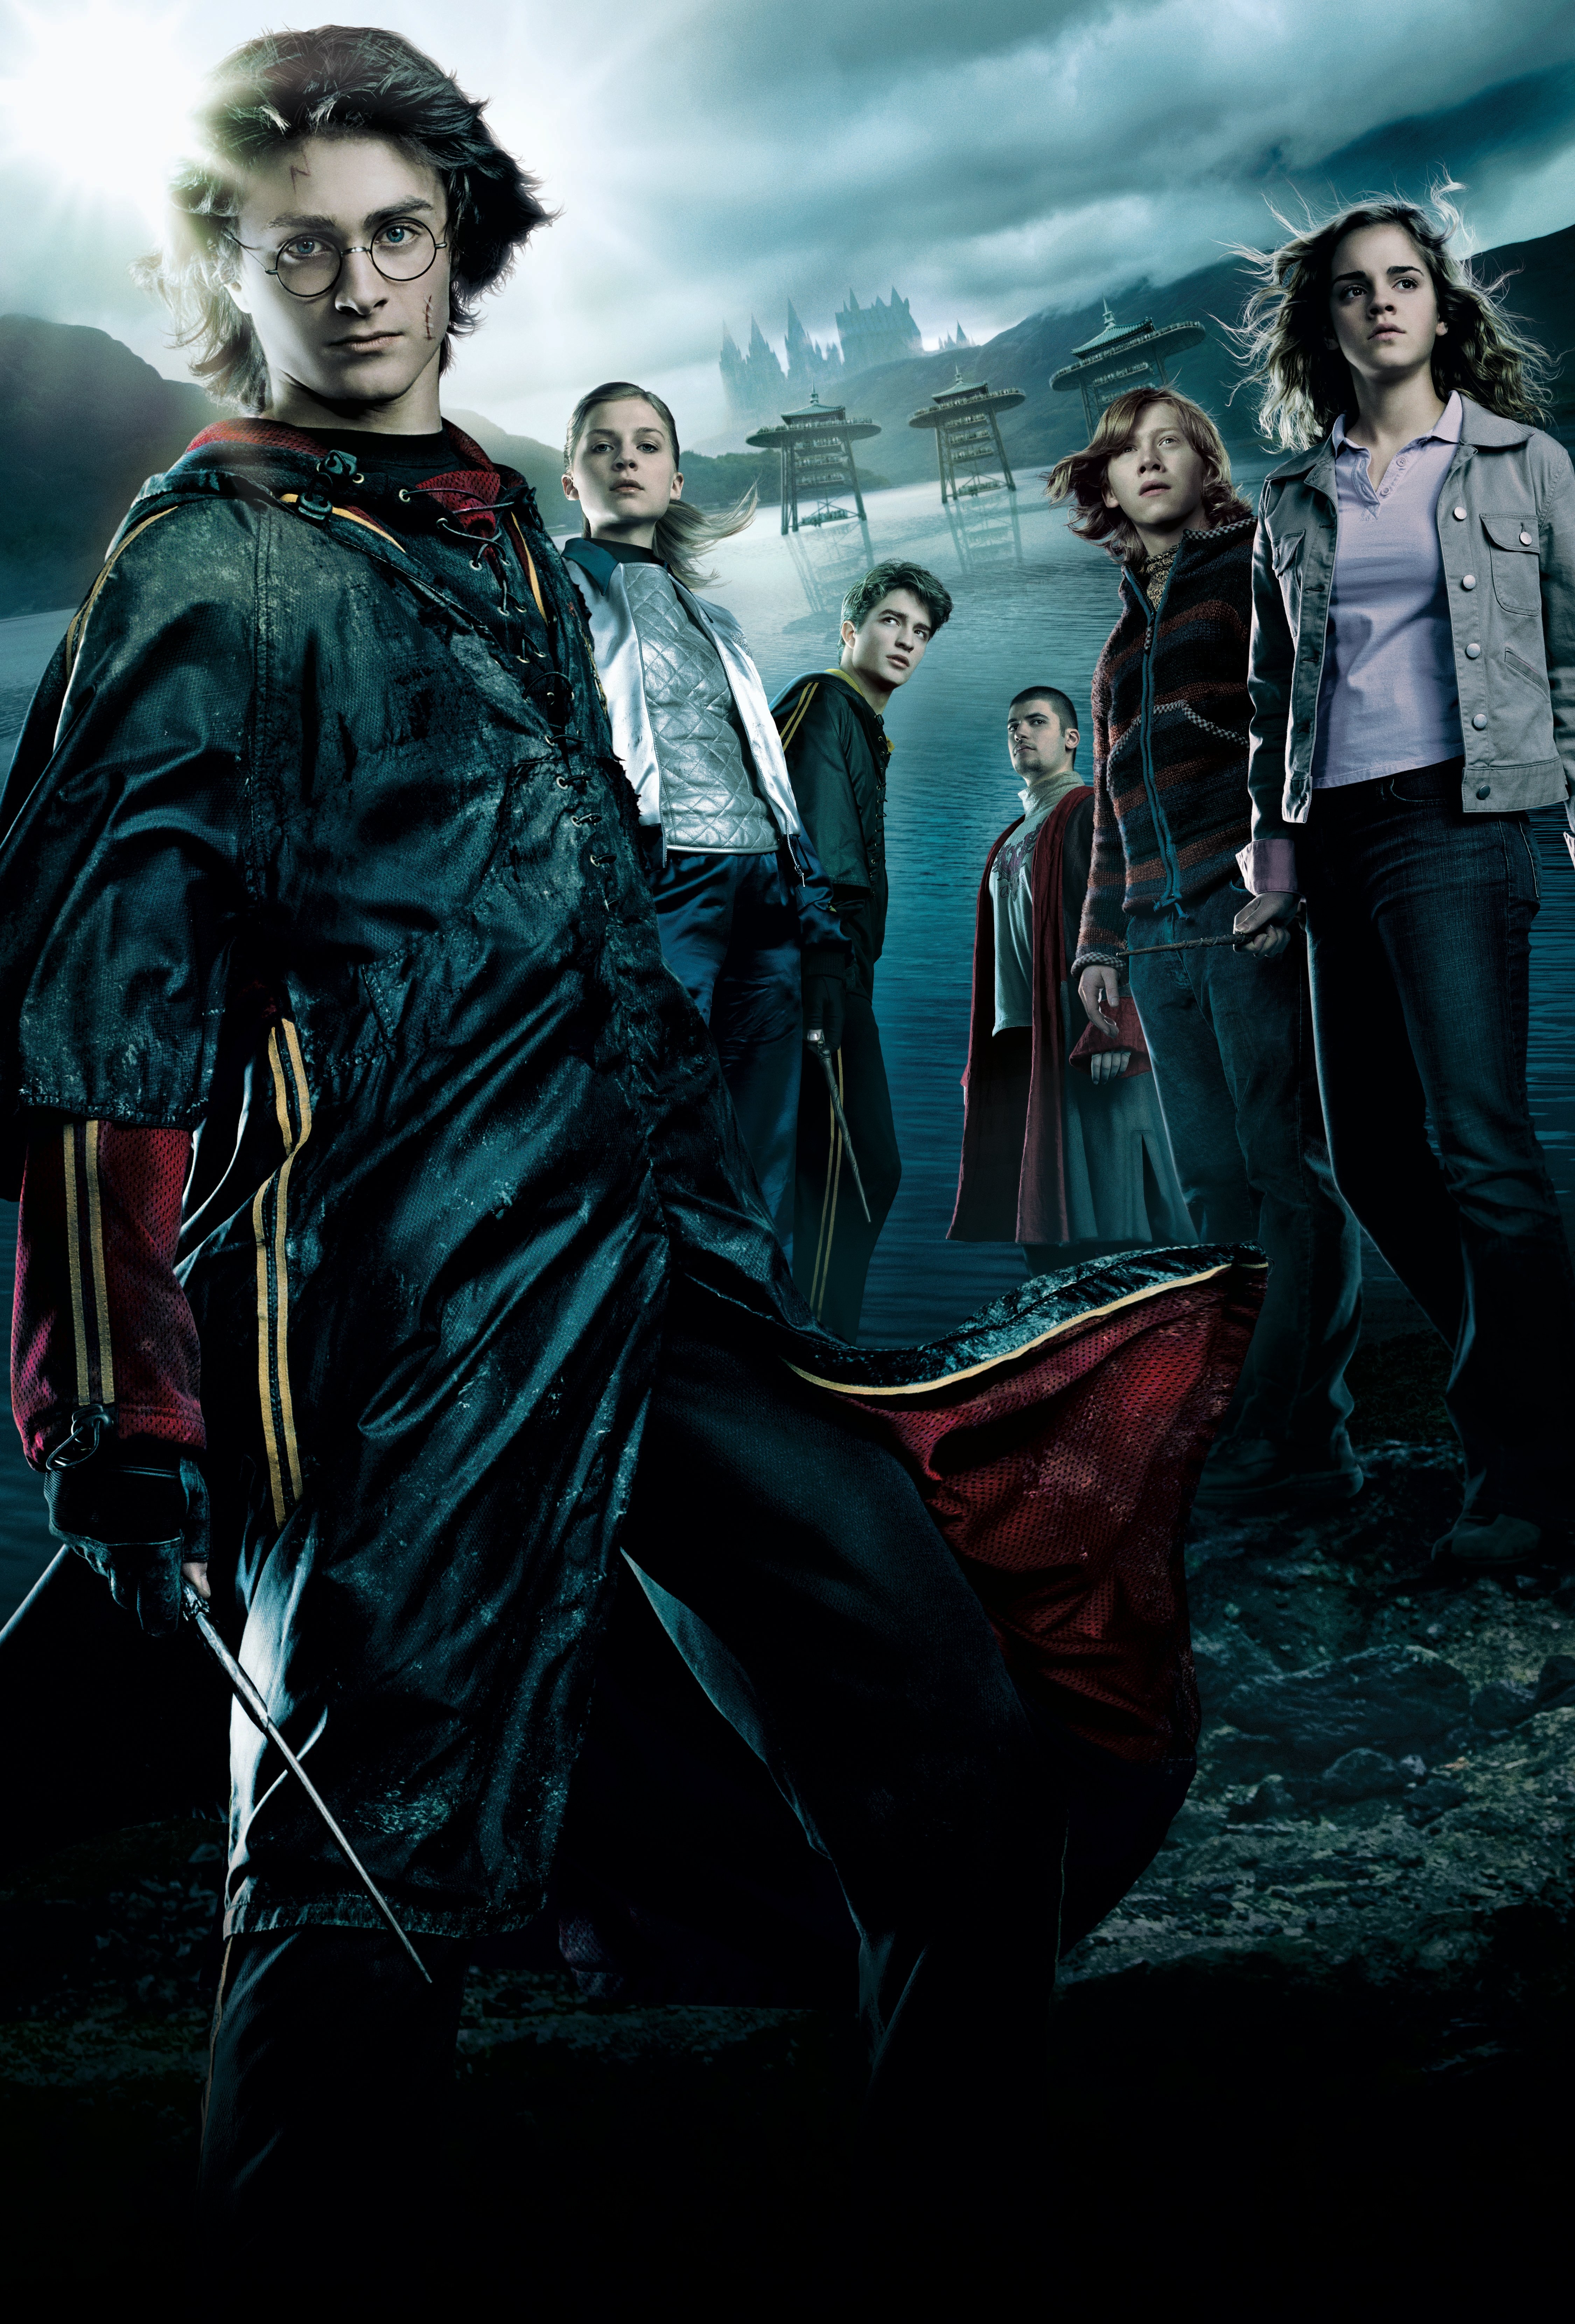 HD wallpaper, Daniel Radcliffe As Harry Potter, Emma Watson As Hermione Granger, Ron Weasley, Harry Potter And The Goblet Of Fire